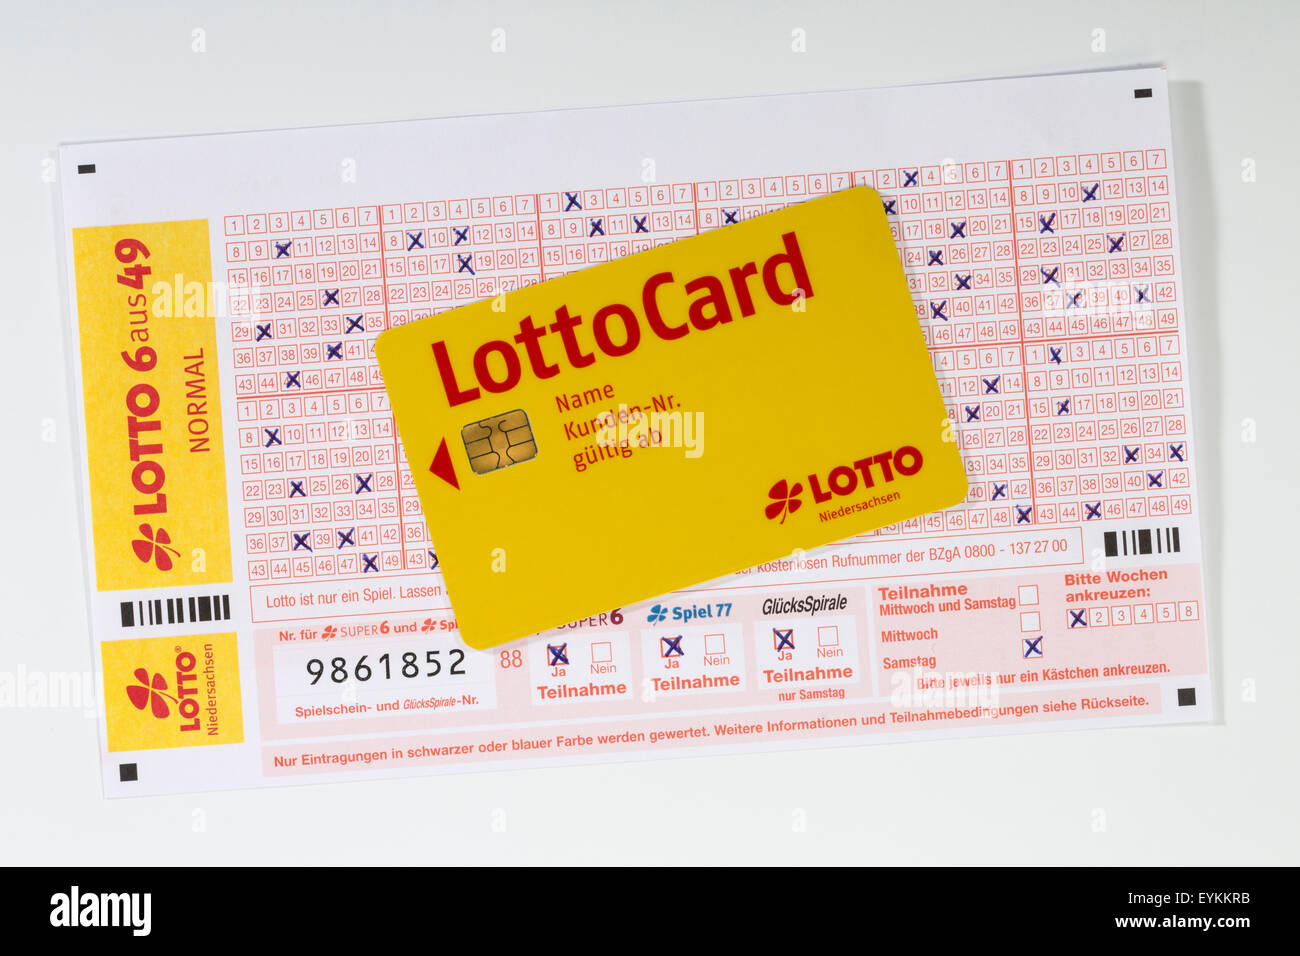 Lottery coupon, satisfactorily, LottoCard Stock Photo - Alamy